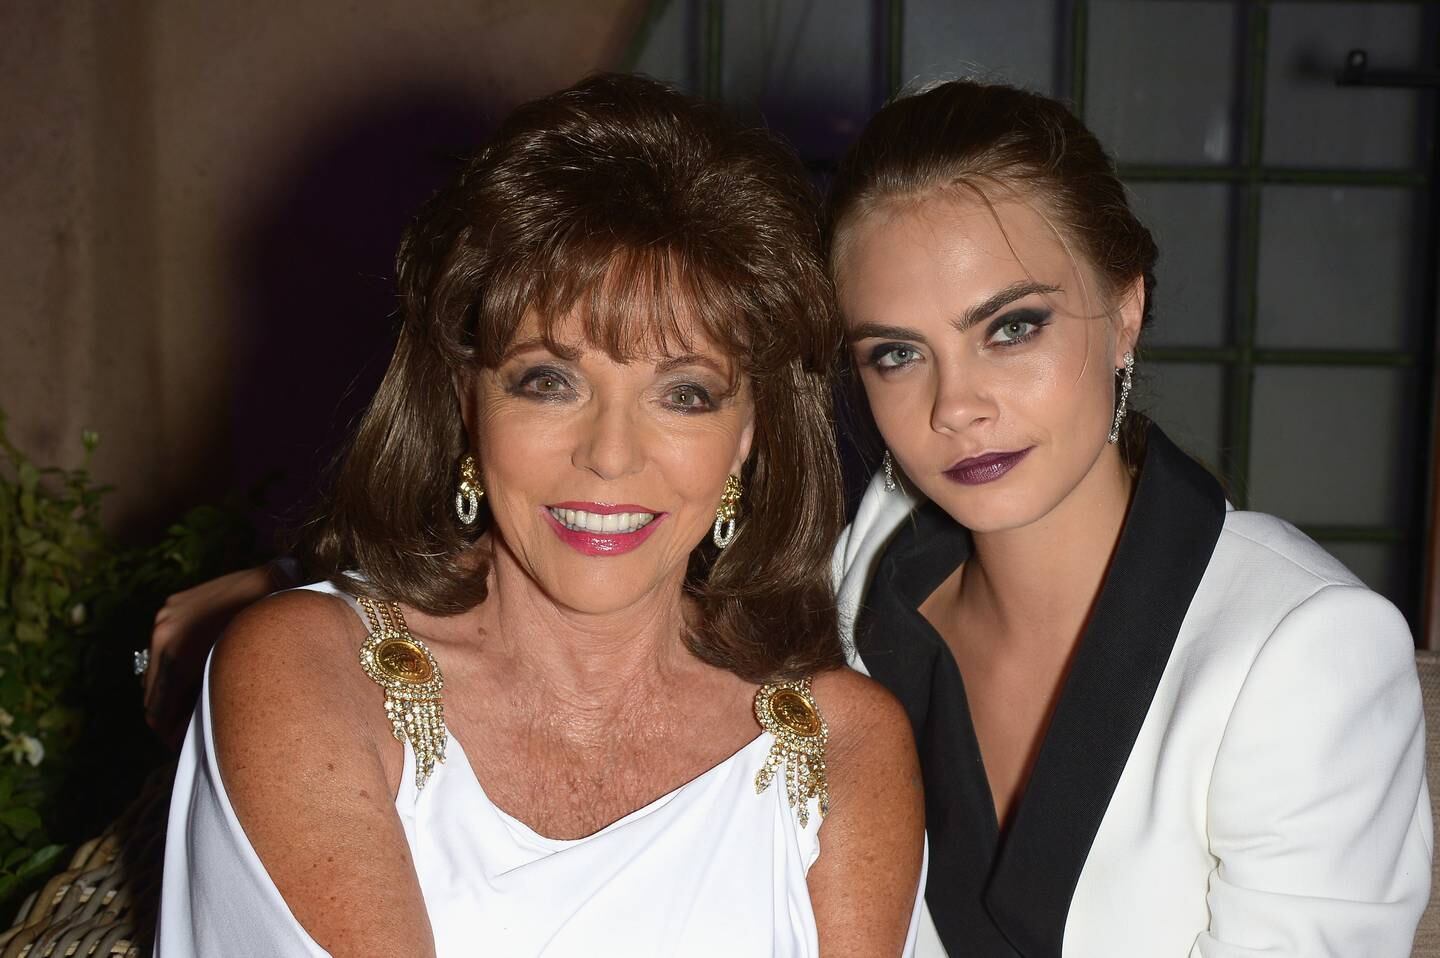 Joan Collins and Cara Delevingne. Getty Images